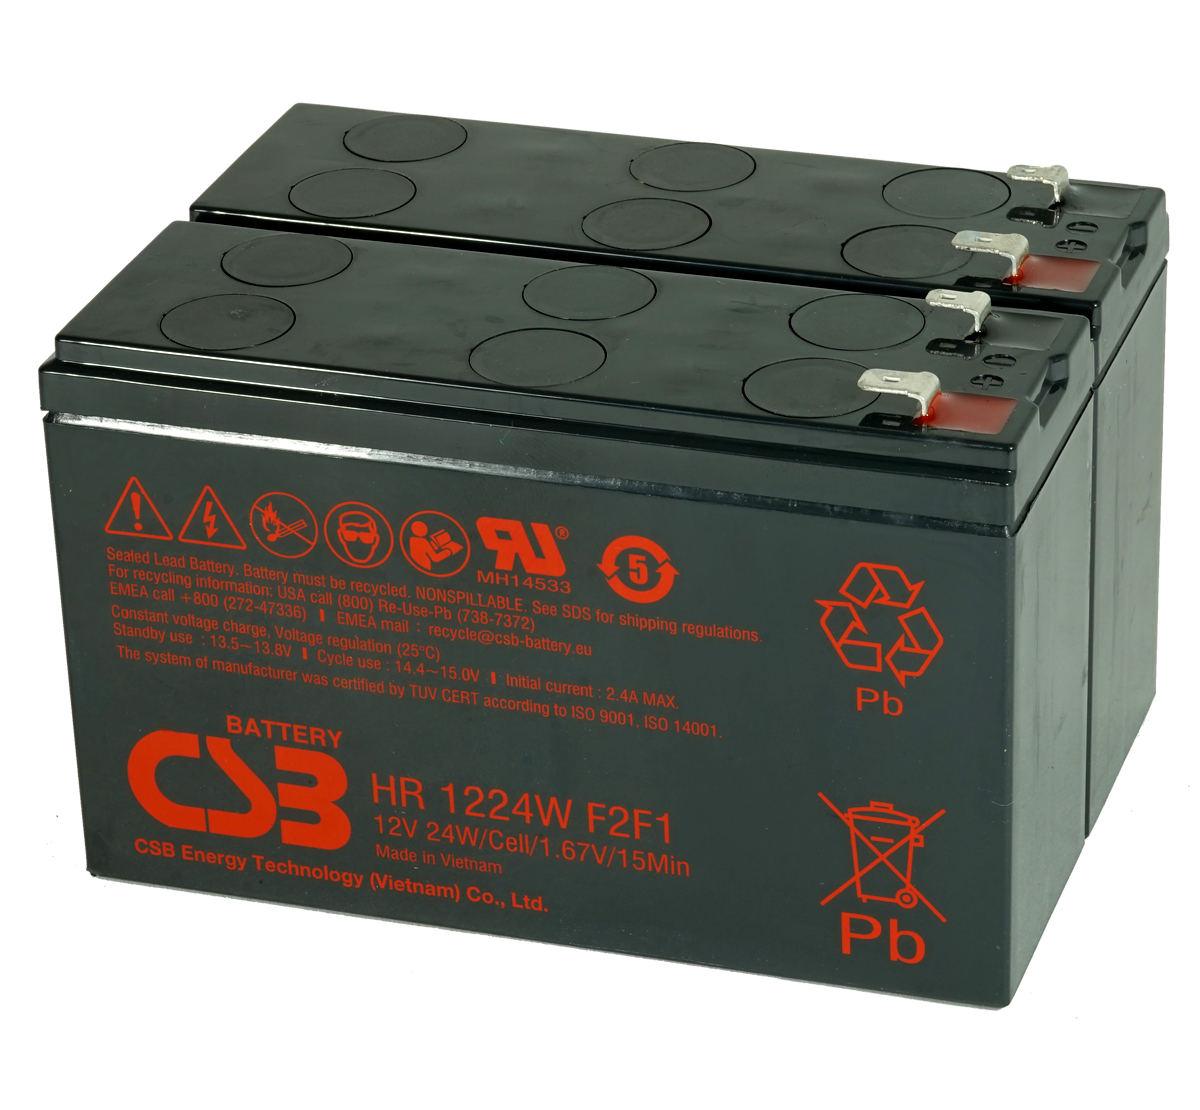 MDS1013 UPS Battery Kit for MGE AB1013